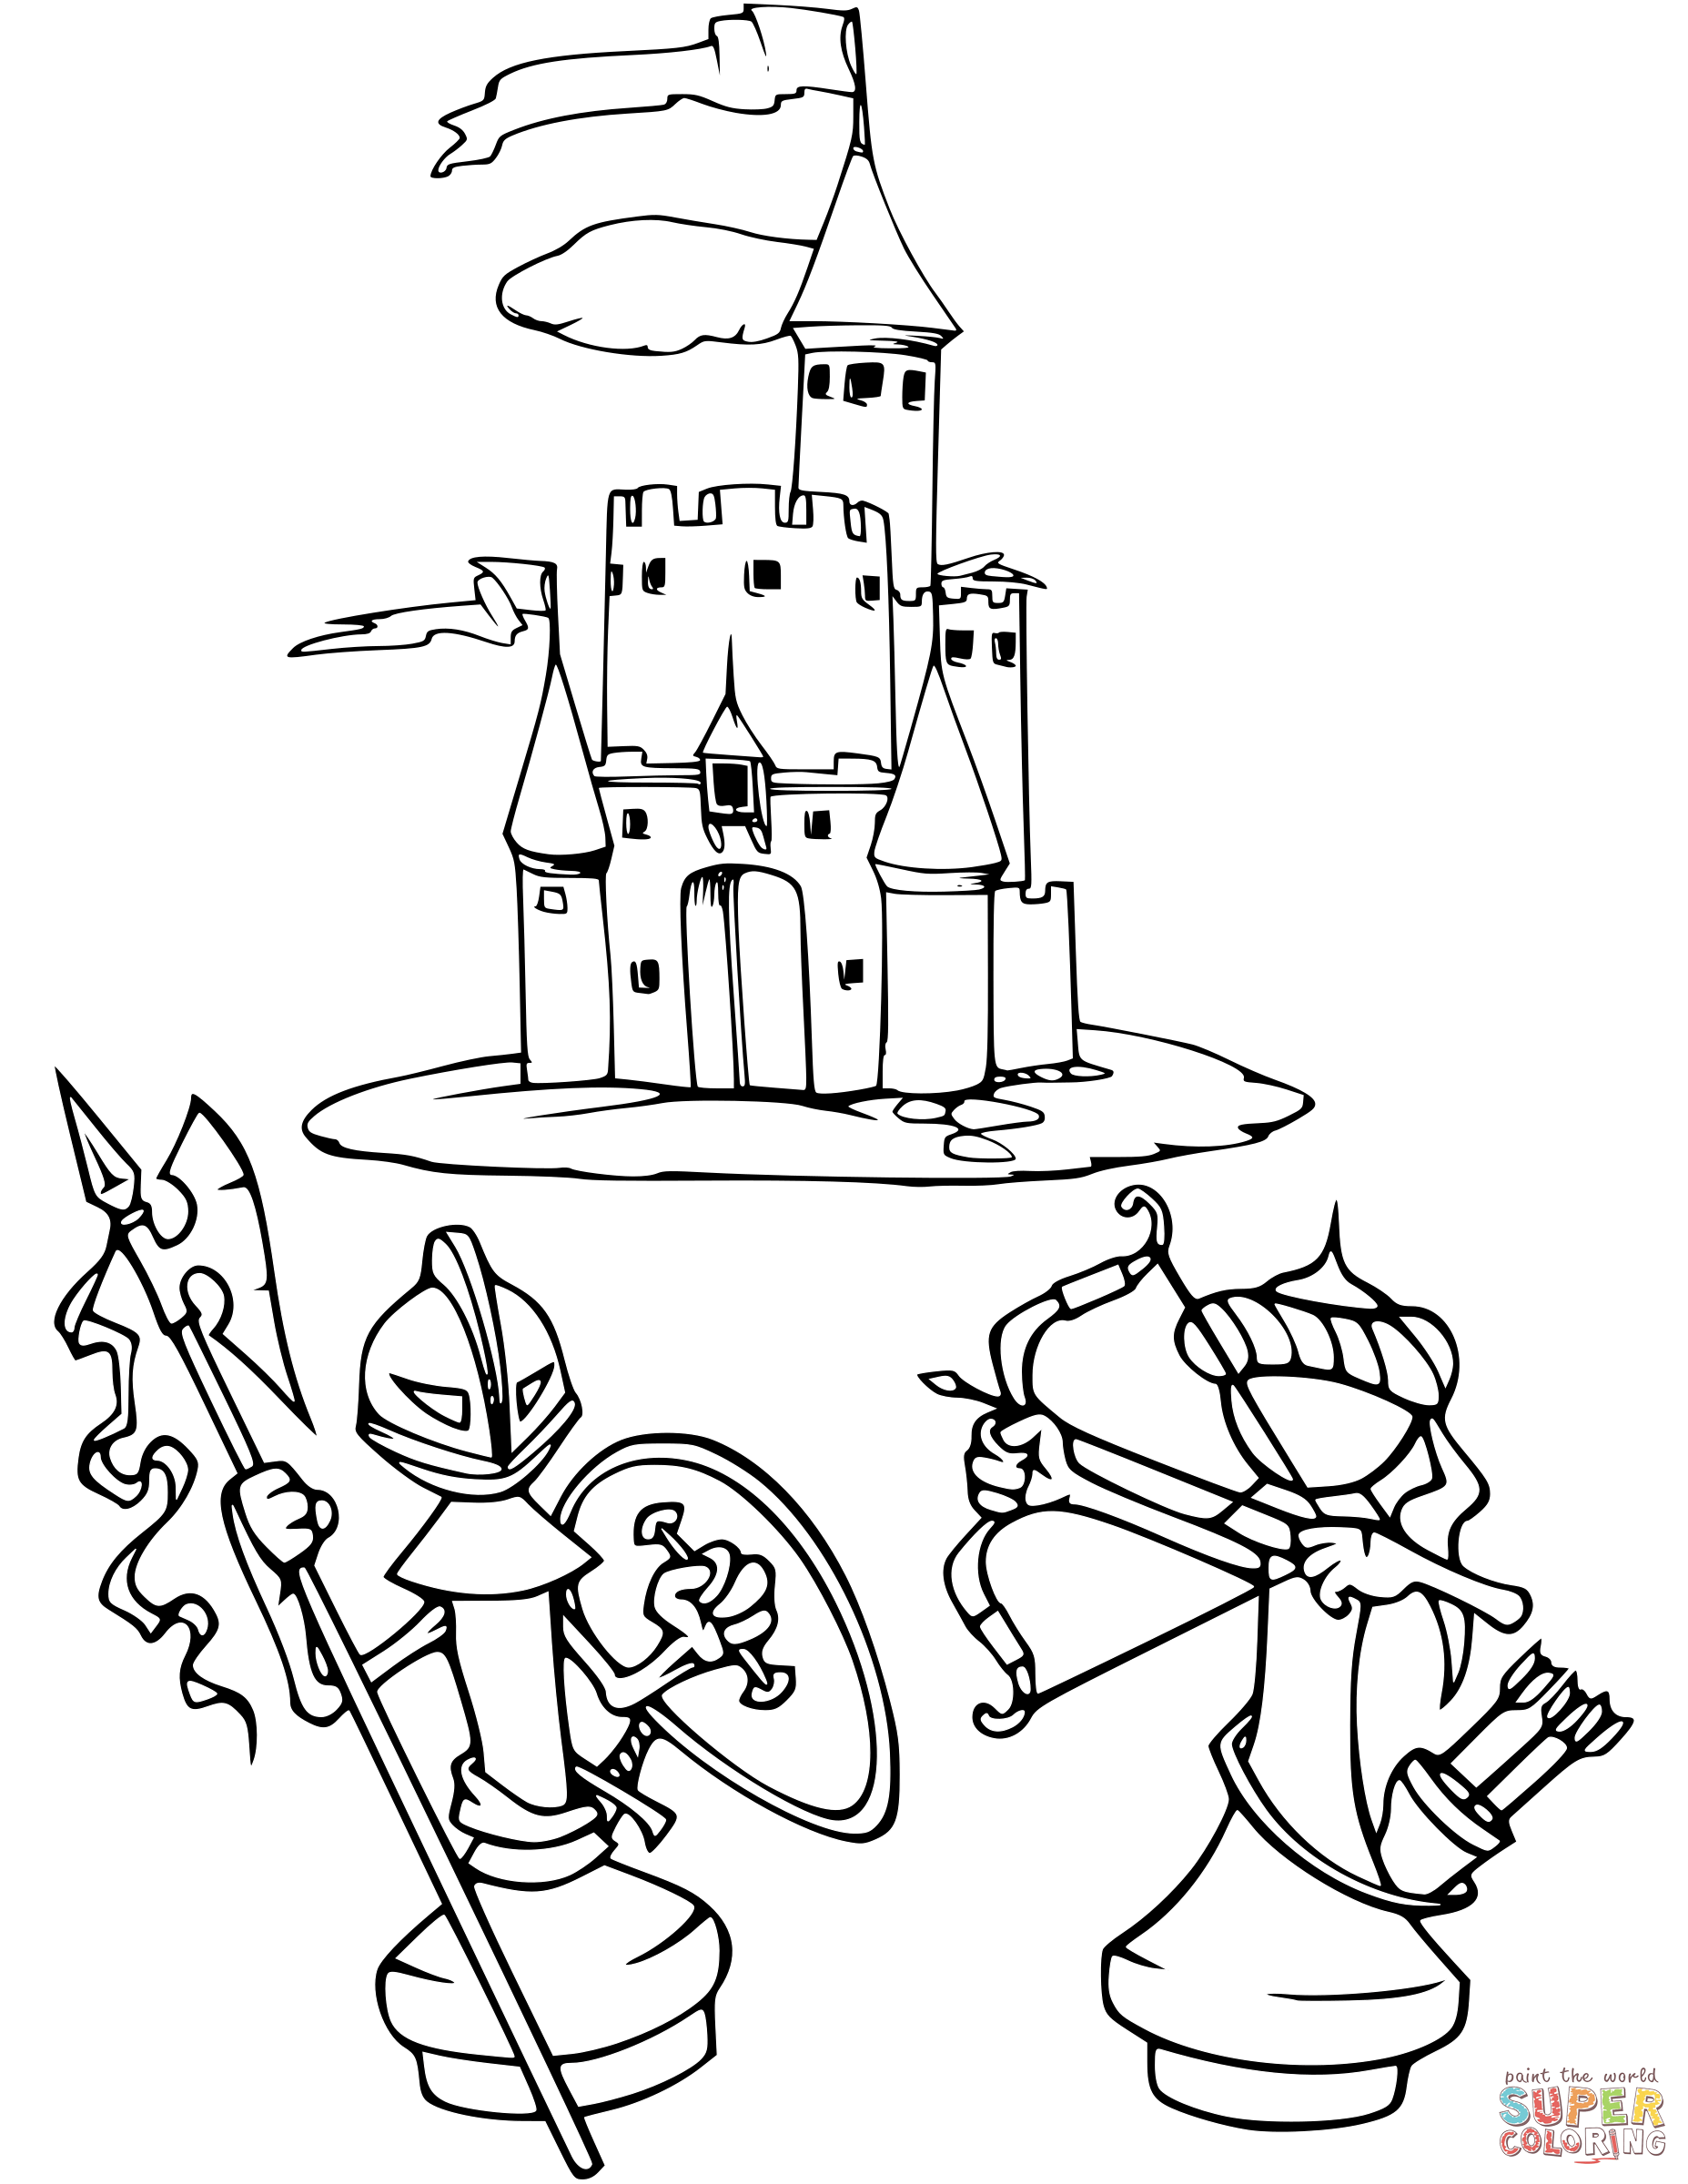 Chess Battle coloring page | Free Printable Coloring Pages